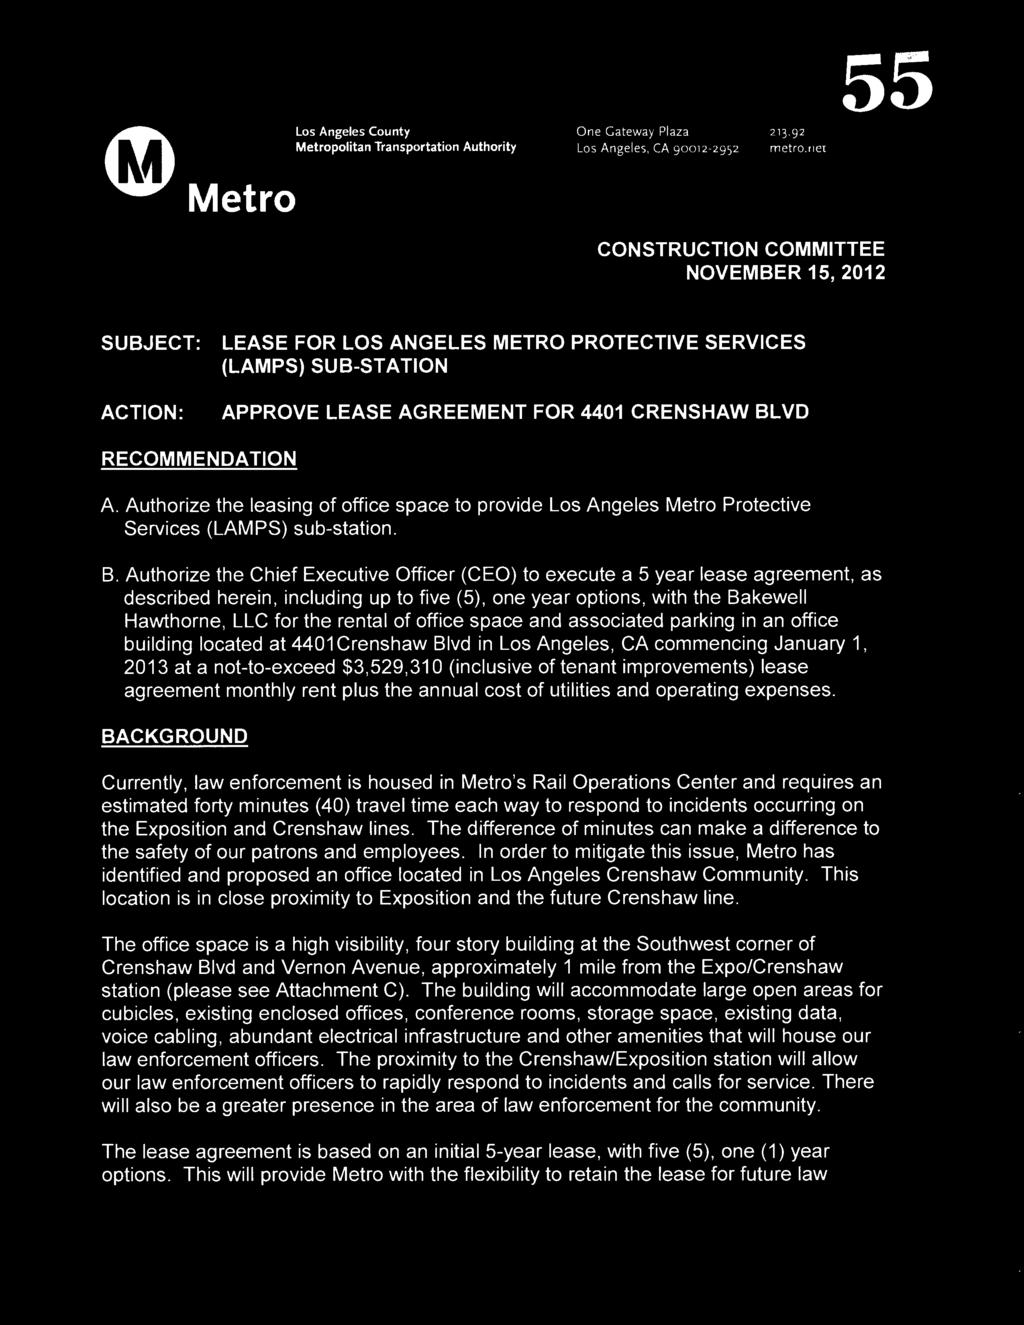 Authorize the leasing of office space to provide Los Angeles Metro Protective Services (LAMPS) sub-station. B.